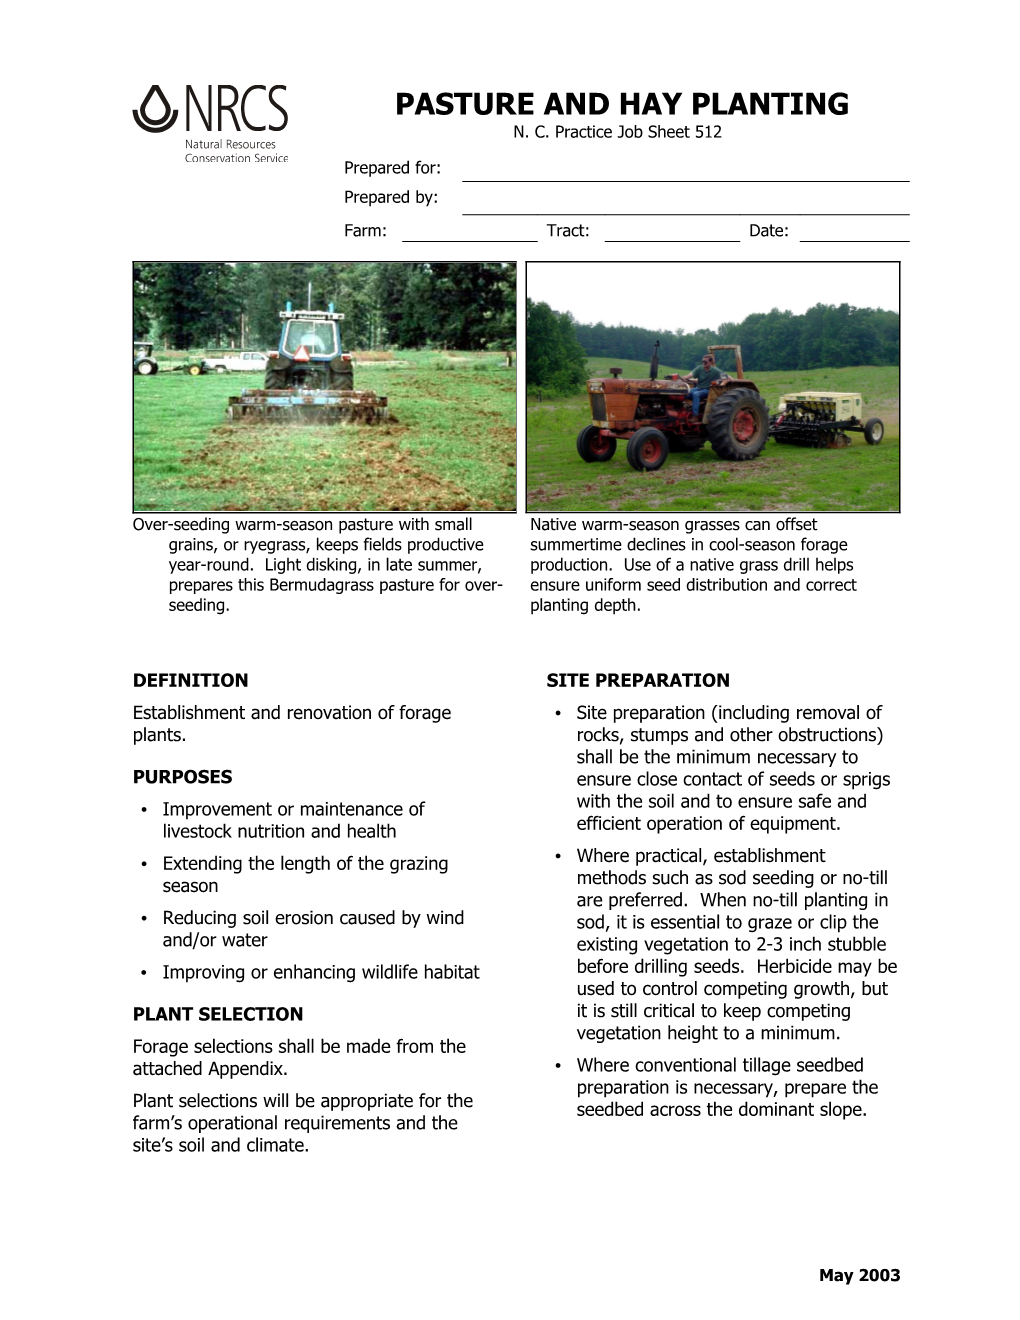 Over-Seeding Warm-Season Pasture with Small Grains, Or Ryegrass, Keeps Fields Productive